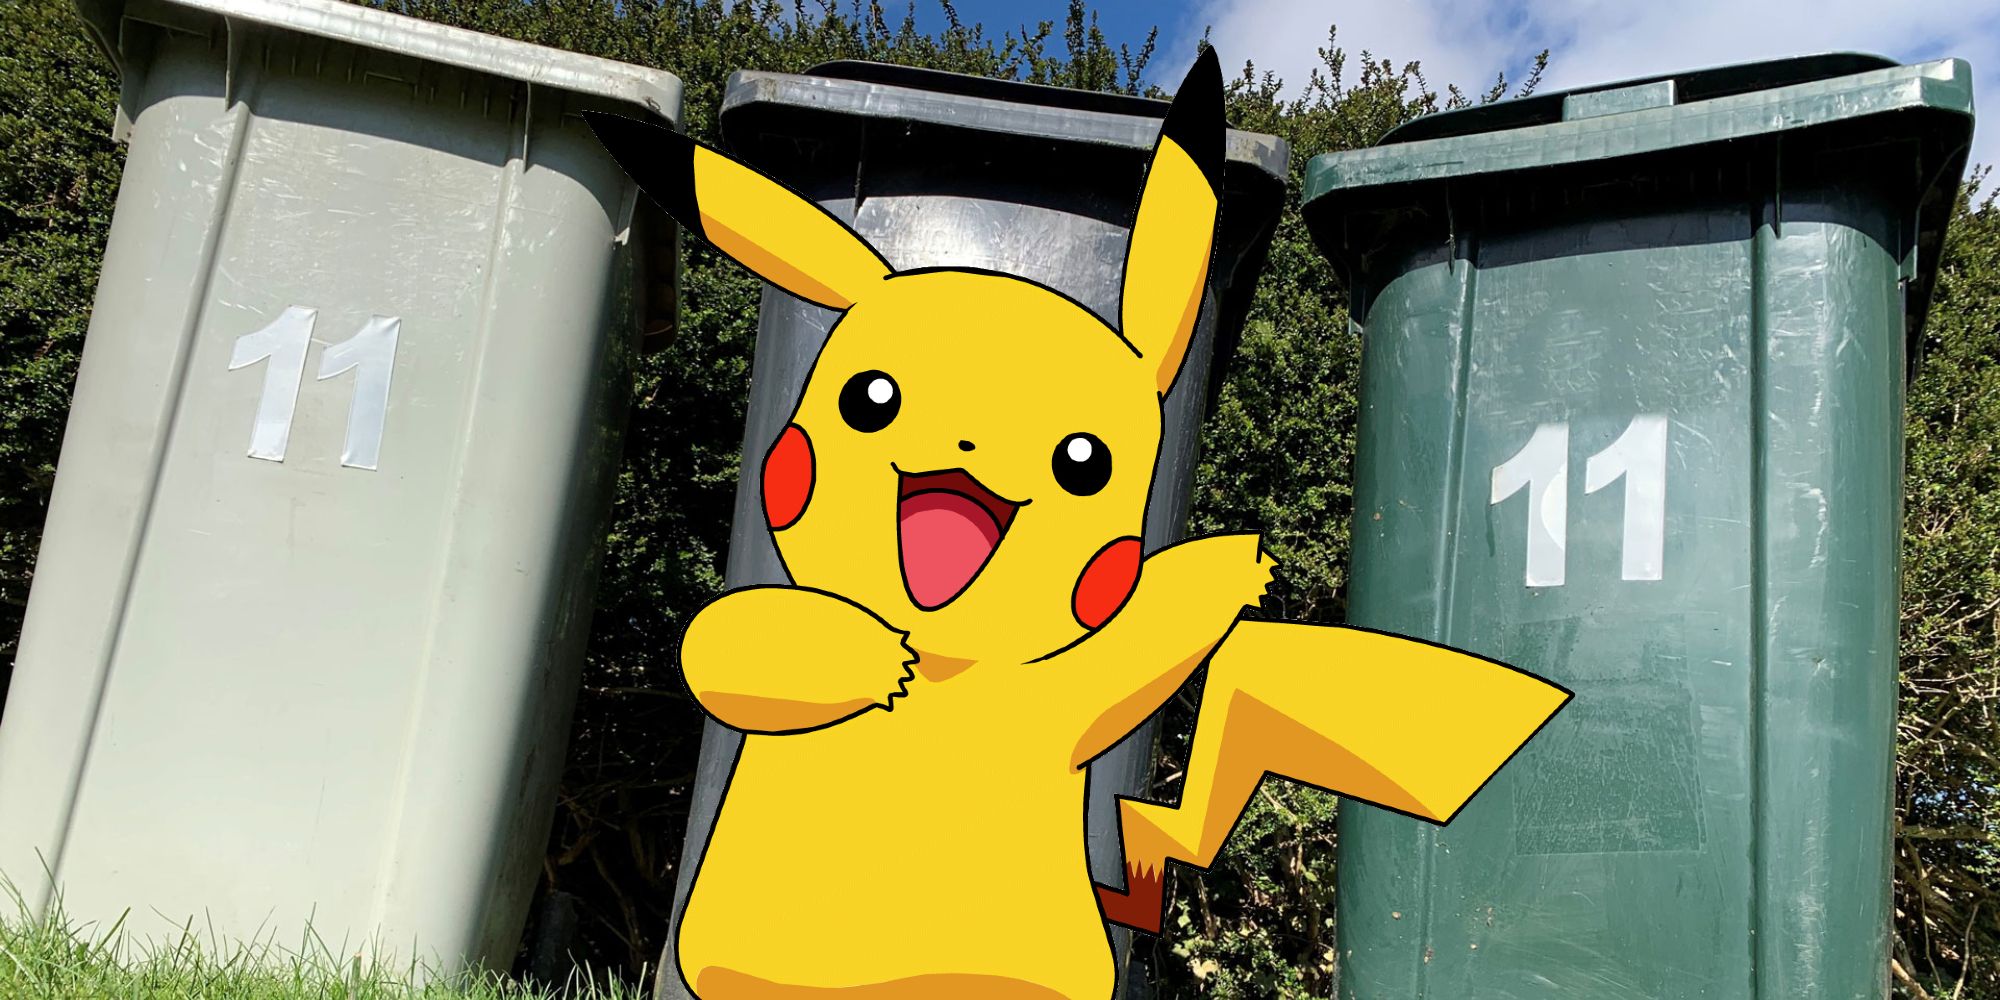 Pikachu in front of some bins.